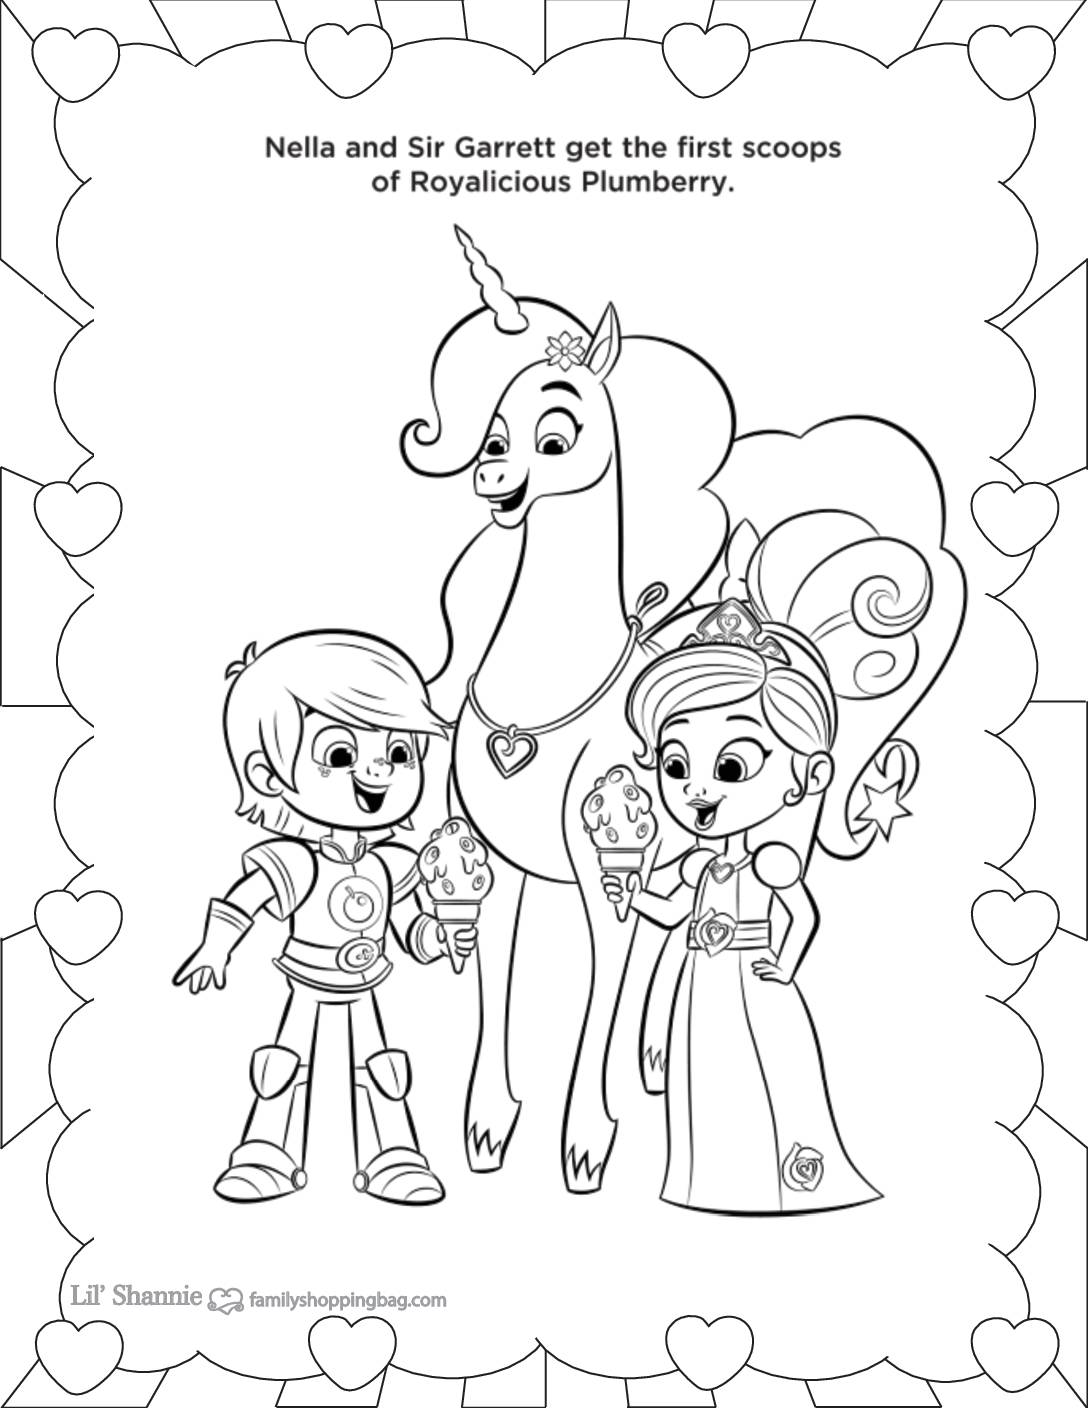 Coloring Page 10 Nella Knight Coloring Pages